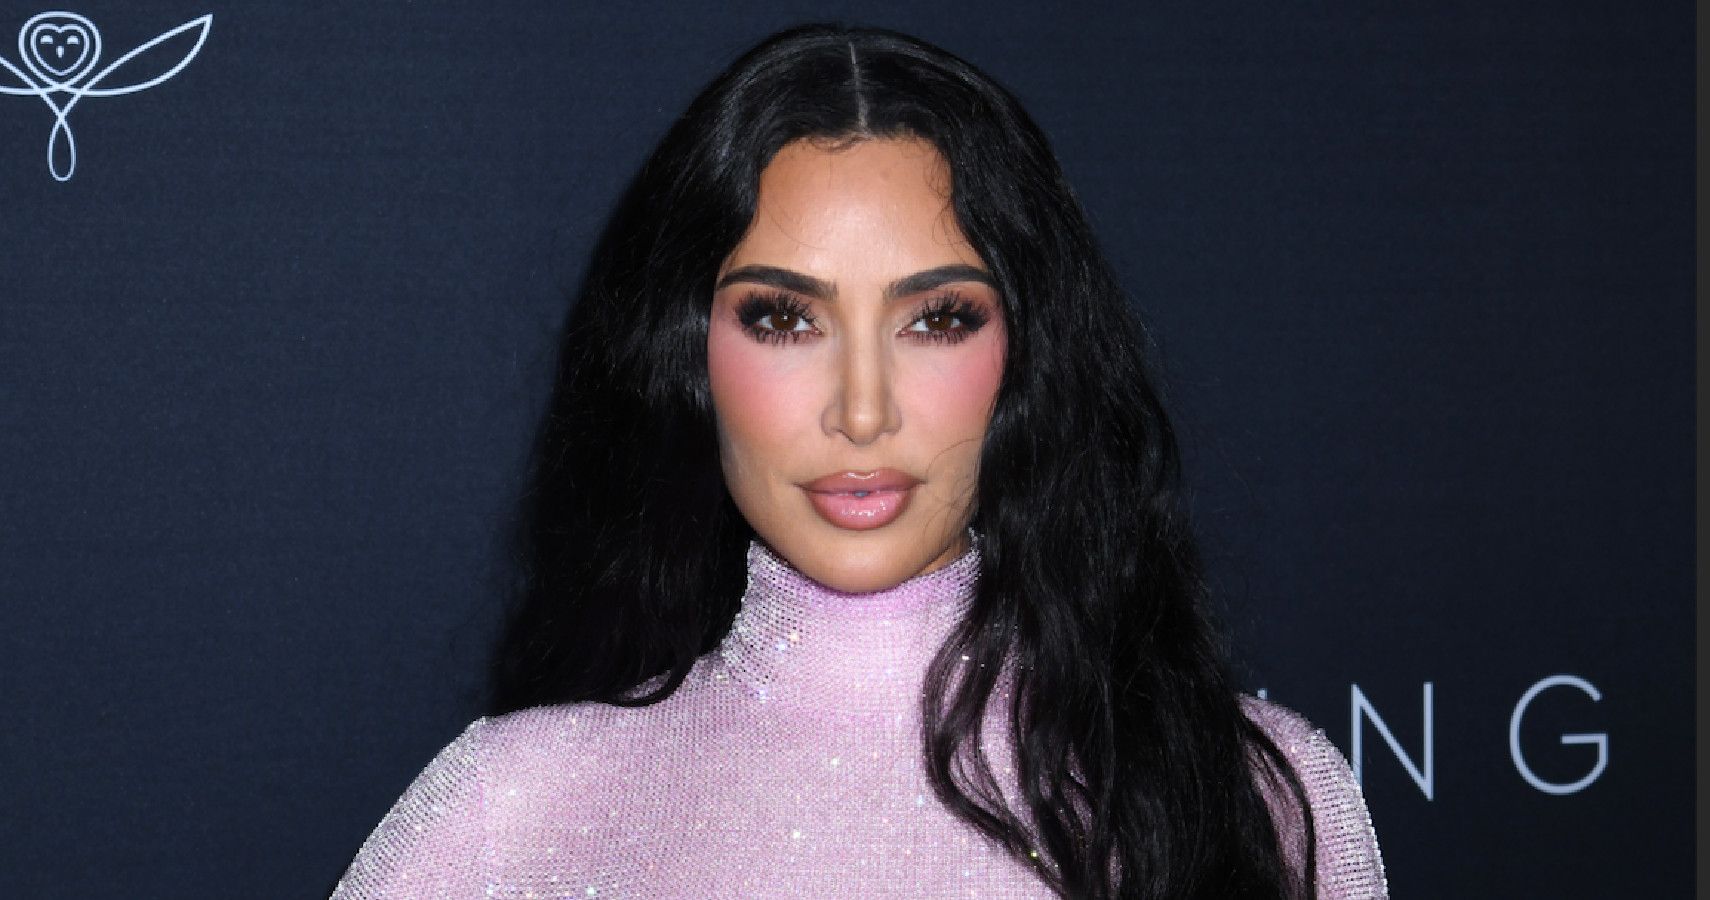 Kim Kardashian Accused Of Faking Workout As She’s Bullied On Social Media